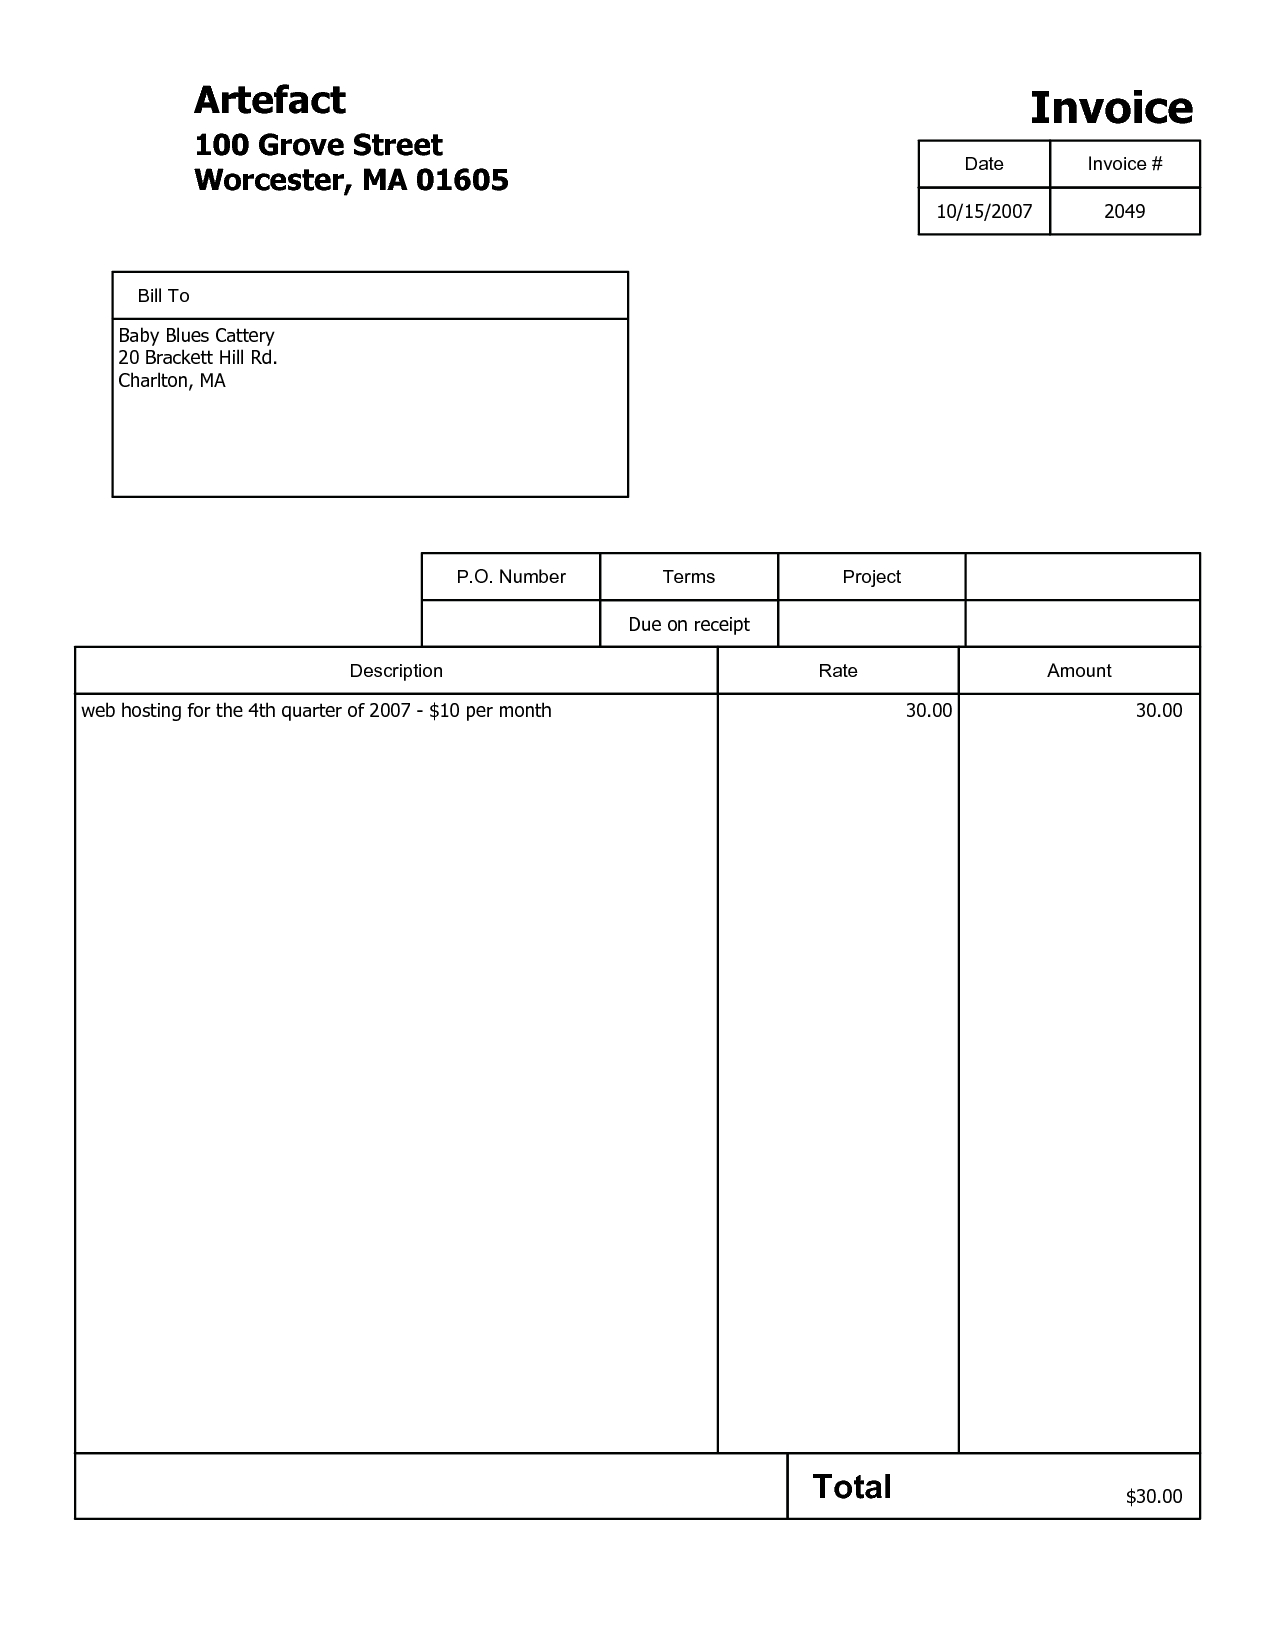 invoice template pdf free download free invoice template new invoice template pdf free download